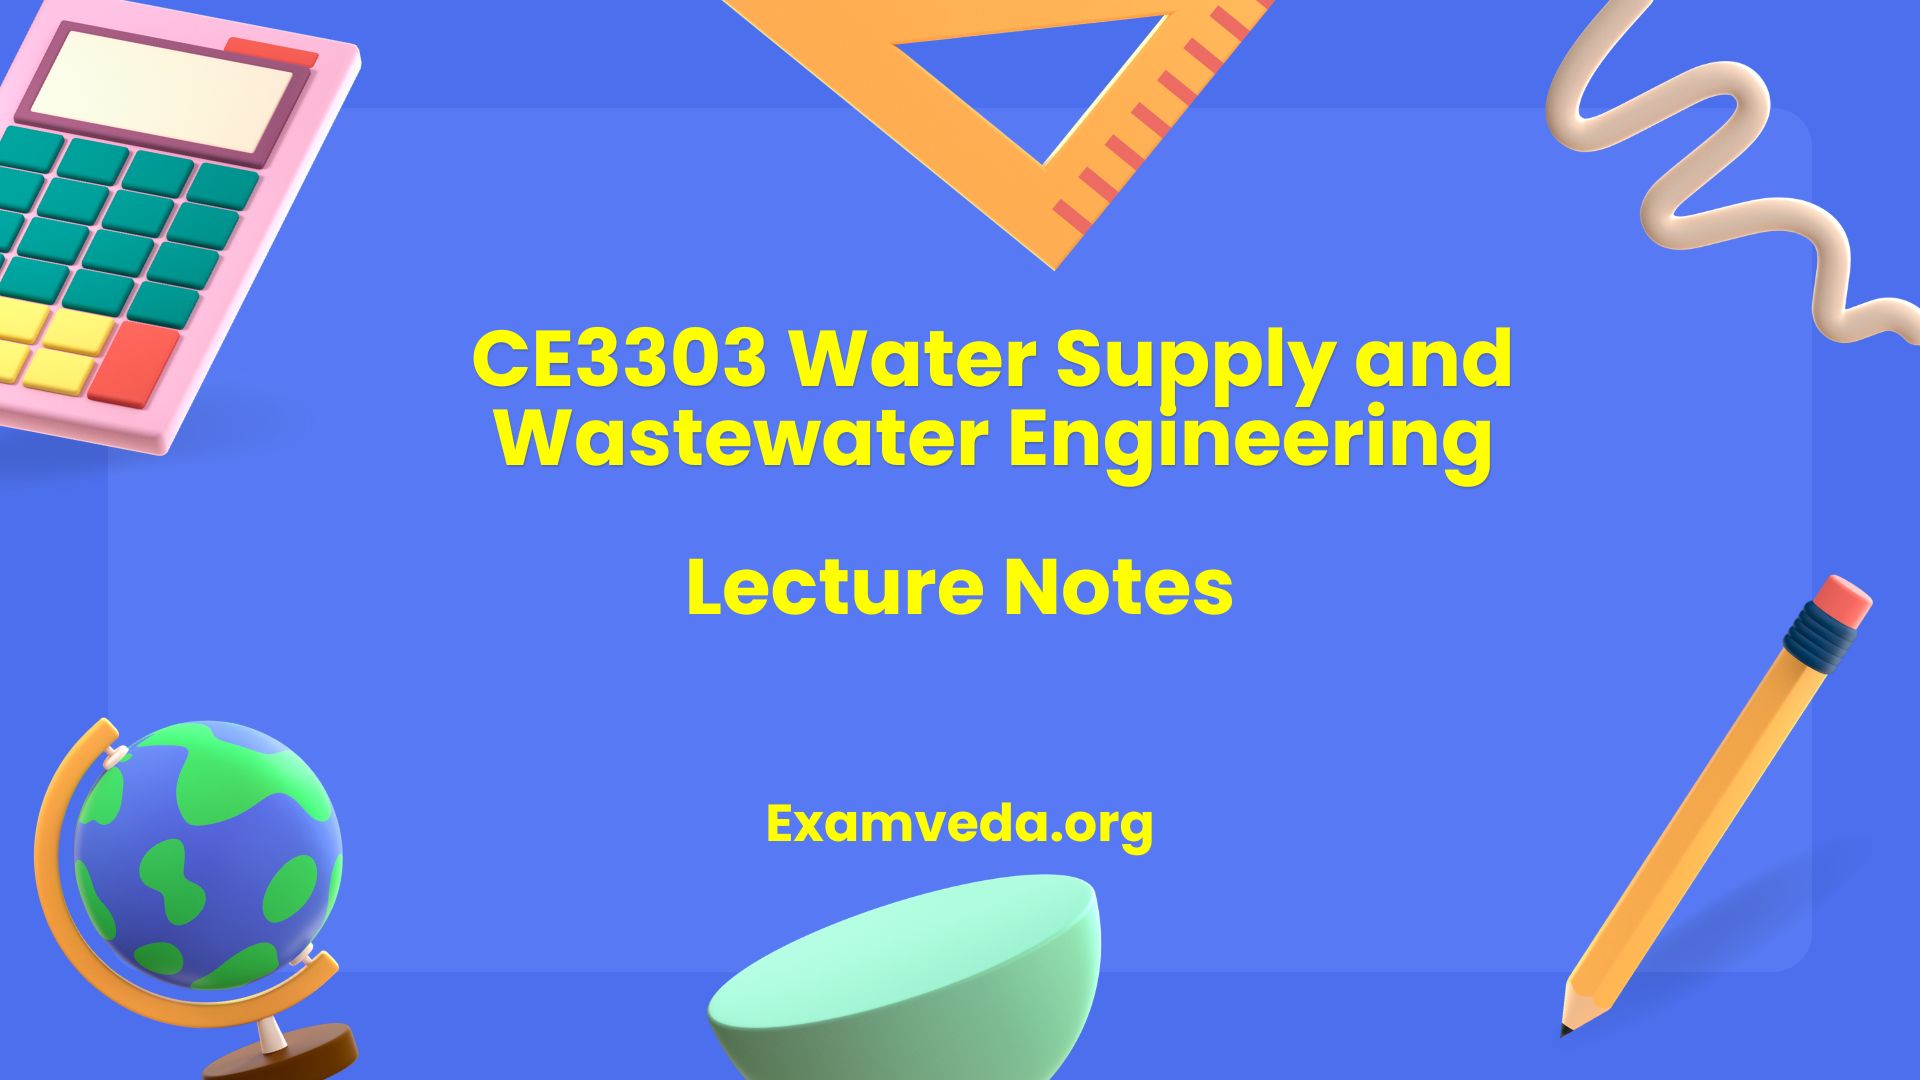 CE3303 Water Supply and Wastewater Engineering Lecture Notes